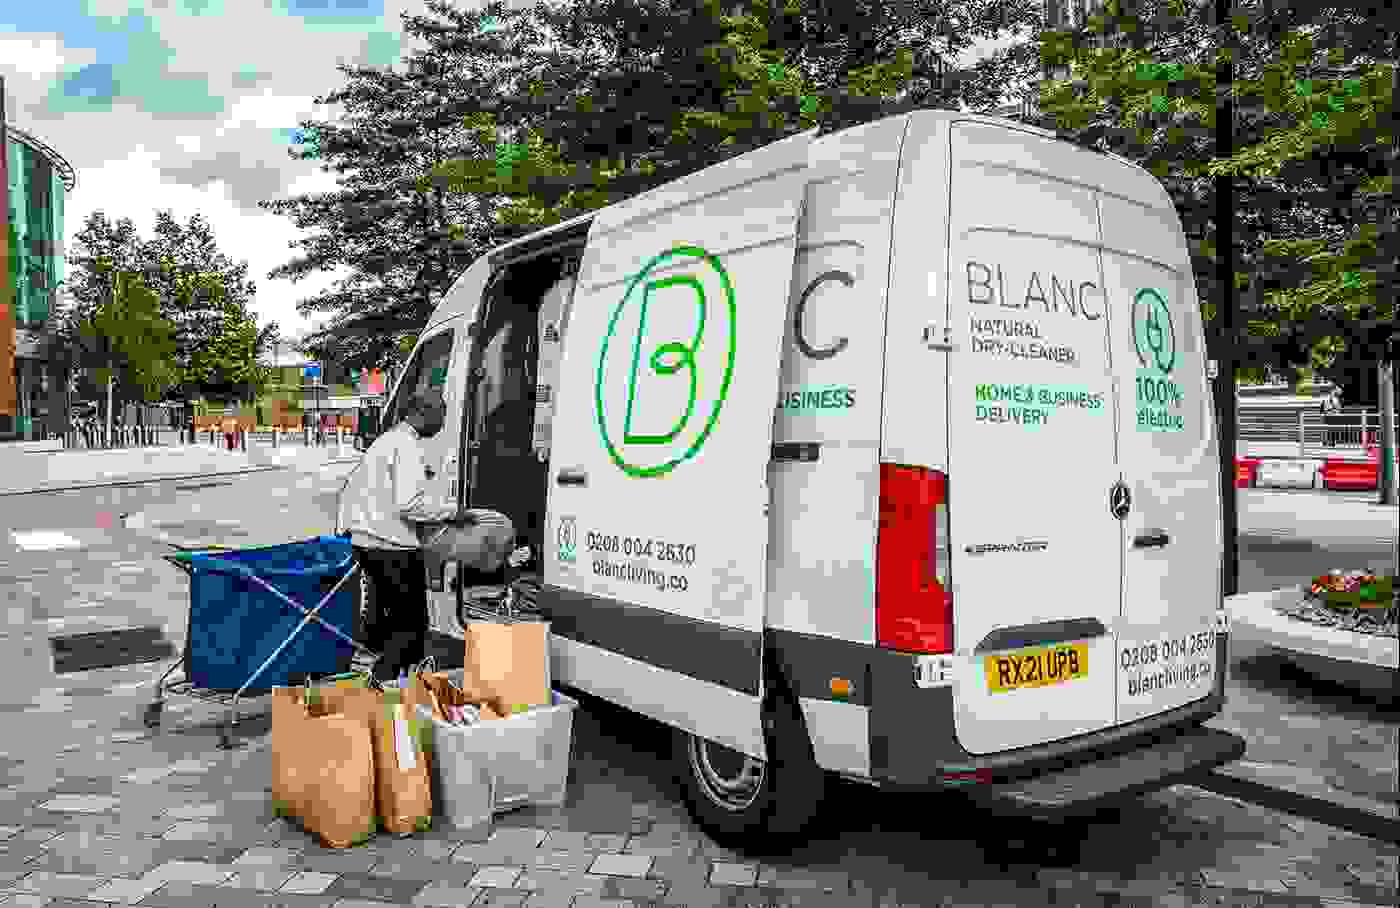 Eco-friendly BLANC looks to Rossetts Commercials for a Mercedes-Benz eSprinter ‘clean sweep’ 